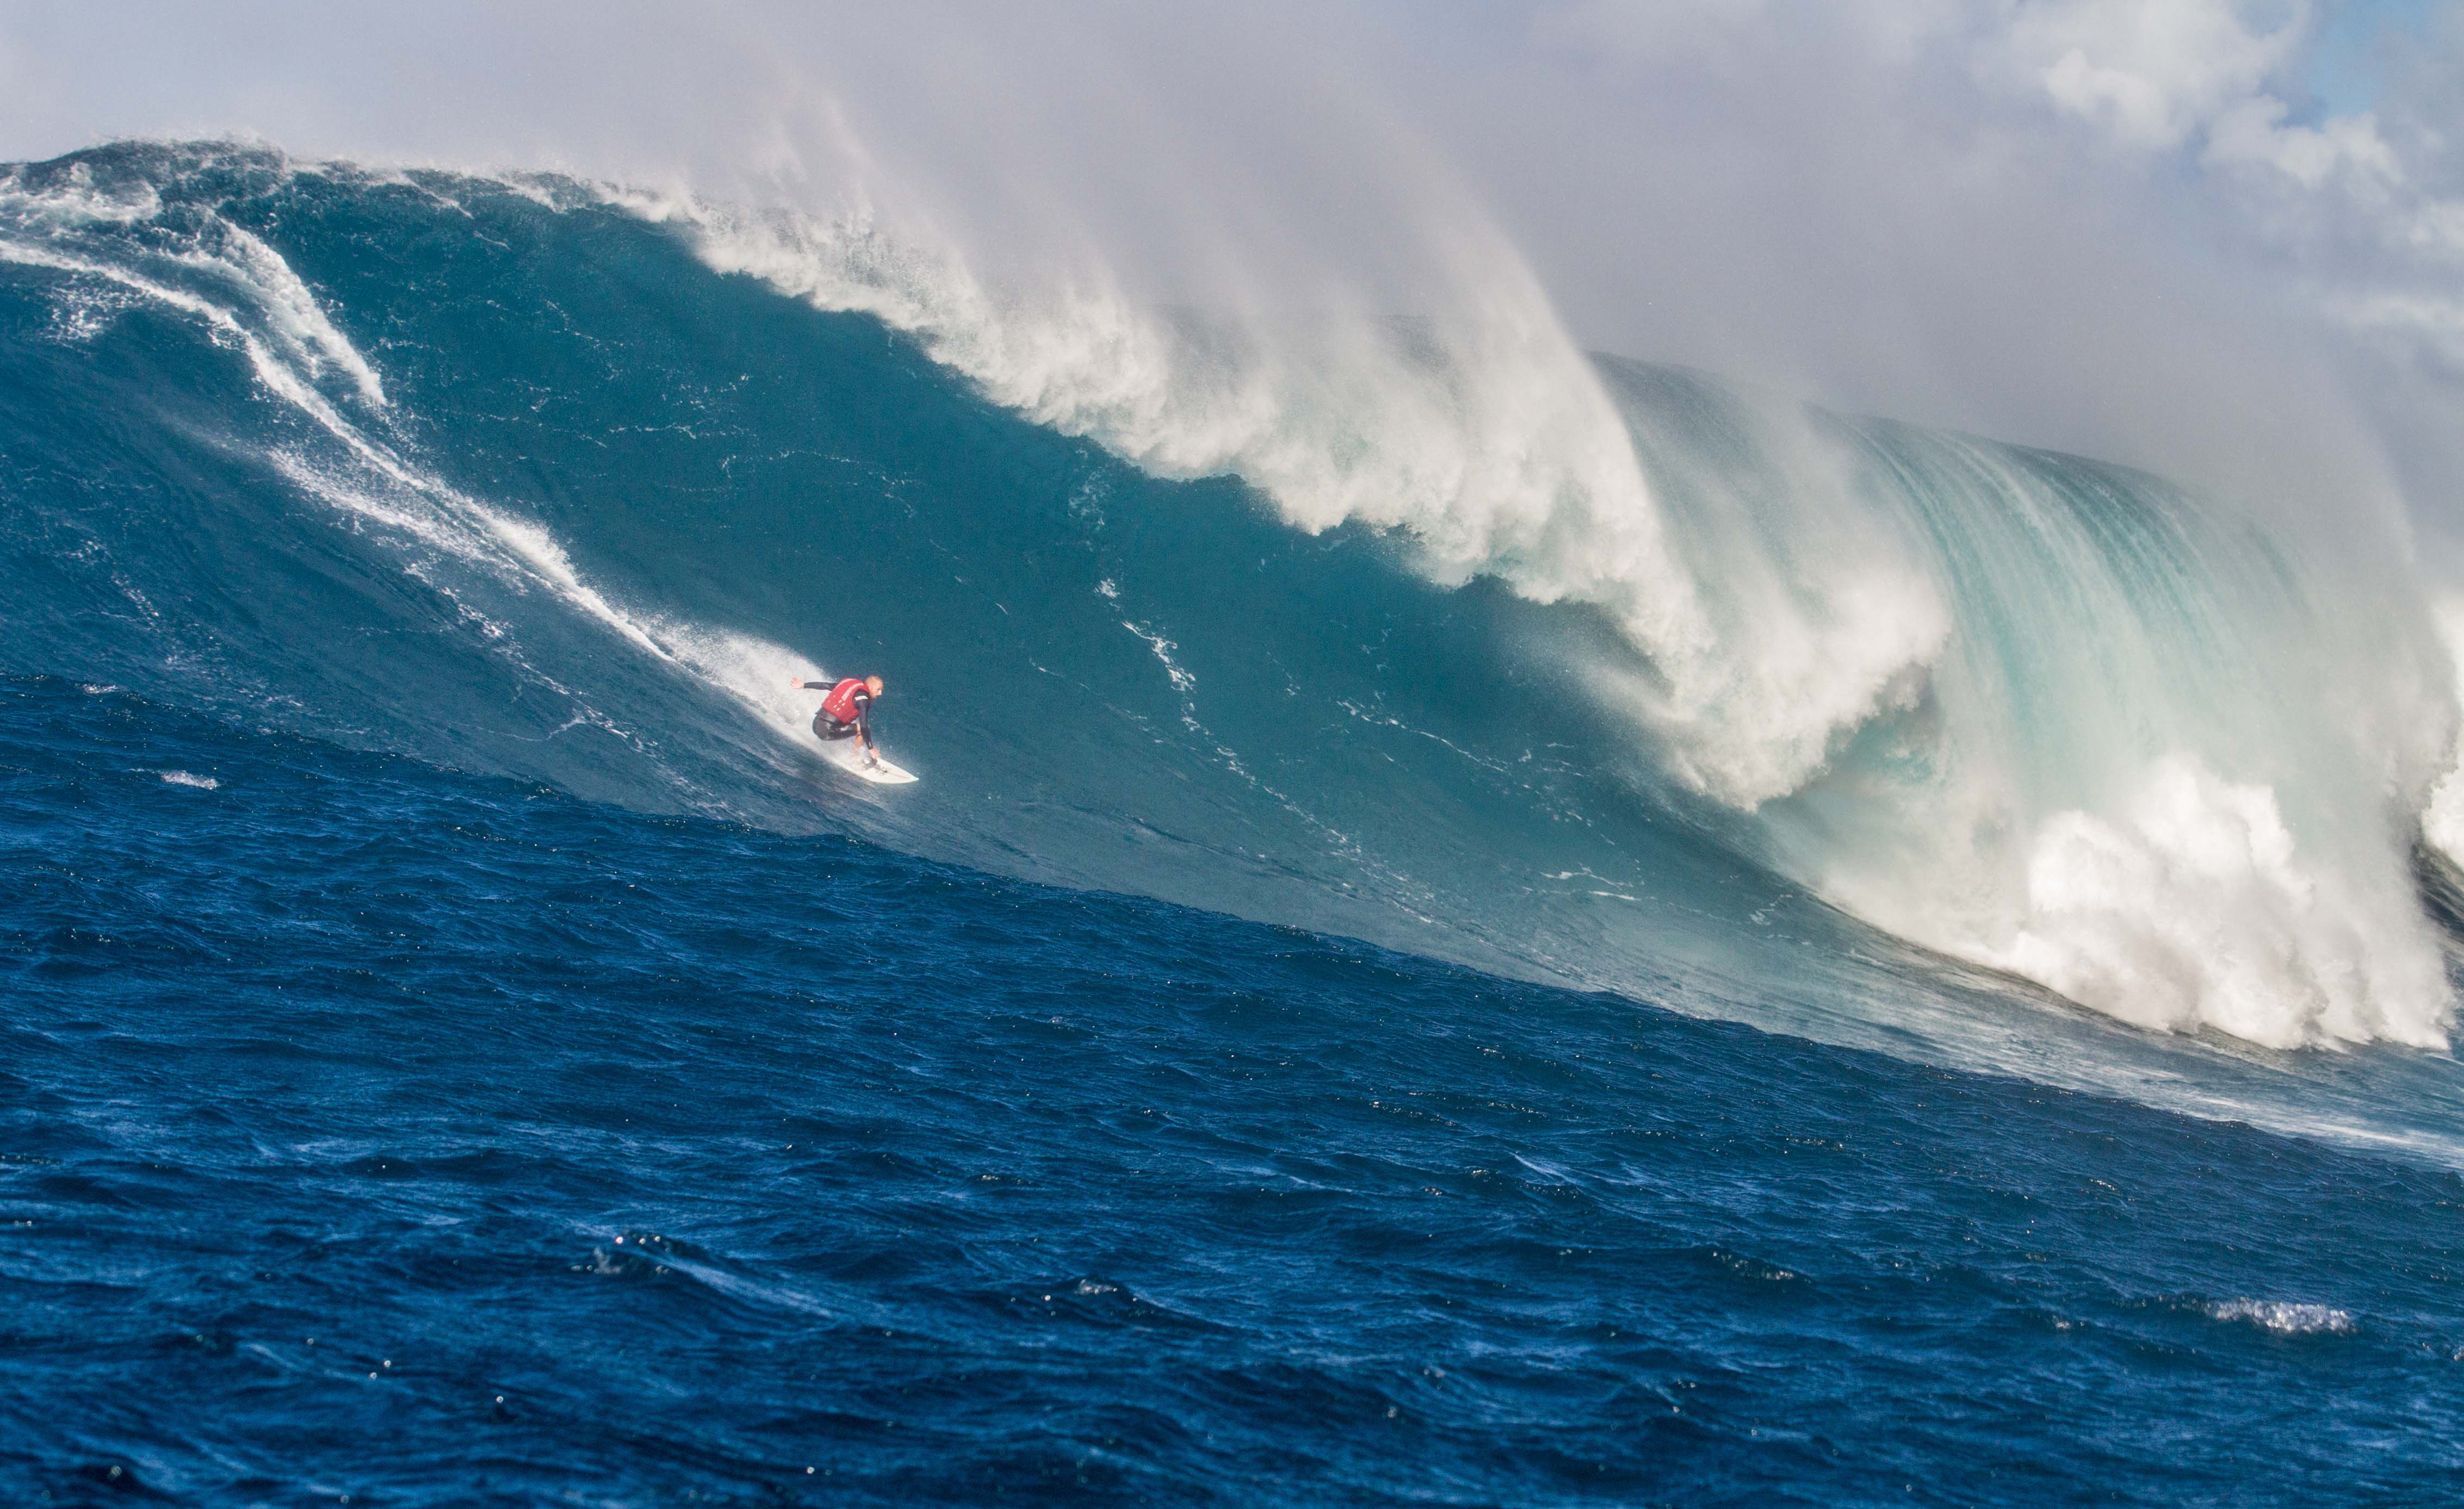 Jokke's first big wave at Peahi, Hawaii. A popular big wave surfing break, Peahi is also known as "jaws". Photo: Richard Hallman